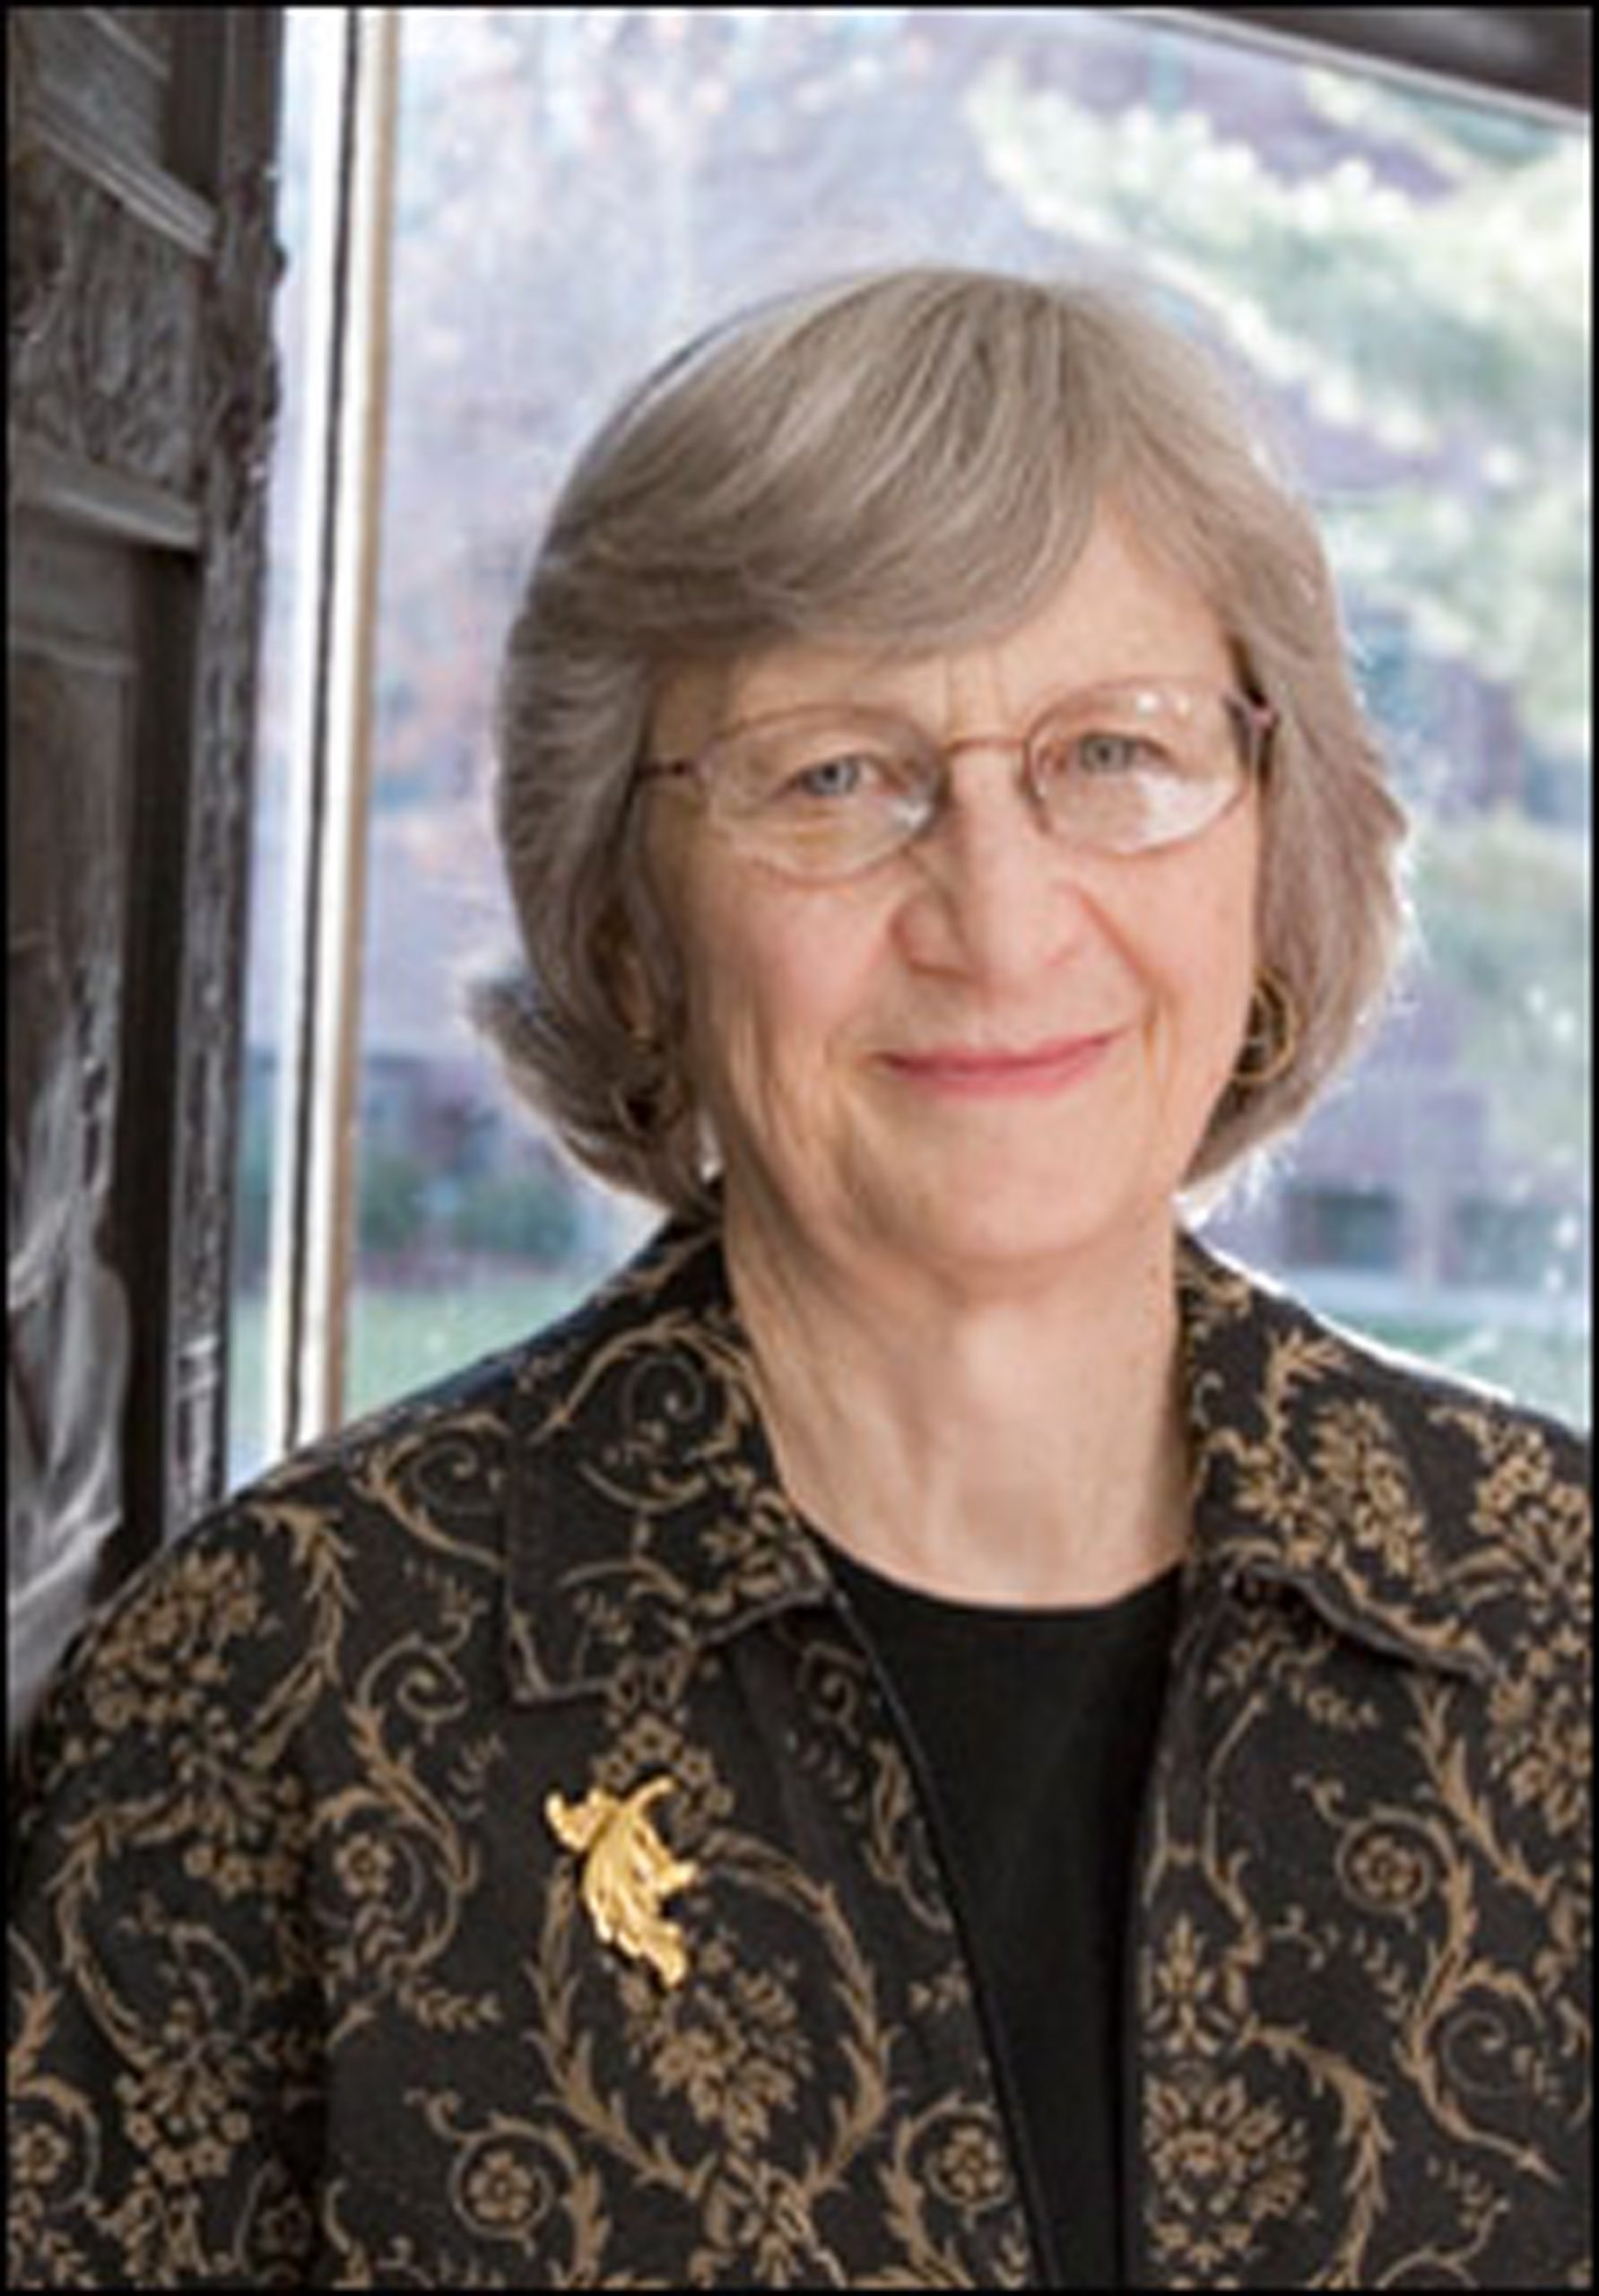 Dr. Laurel Ulrich, Phillips Professor of Early American History and 300th Anniversary University Professor at Harvard University.